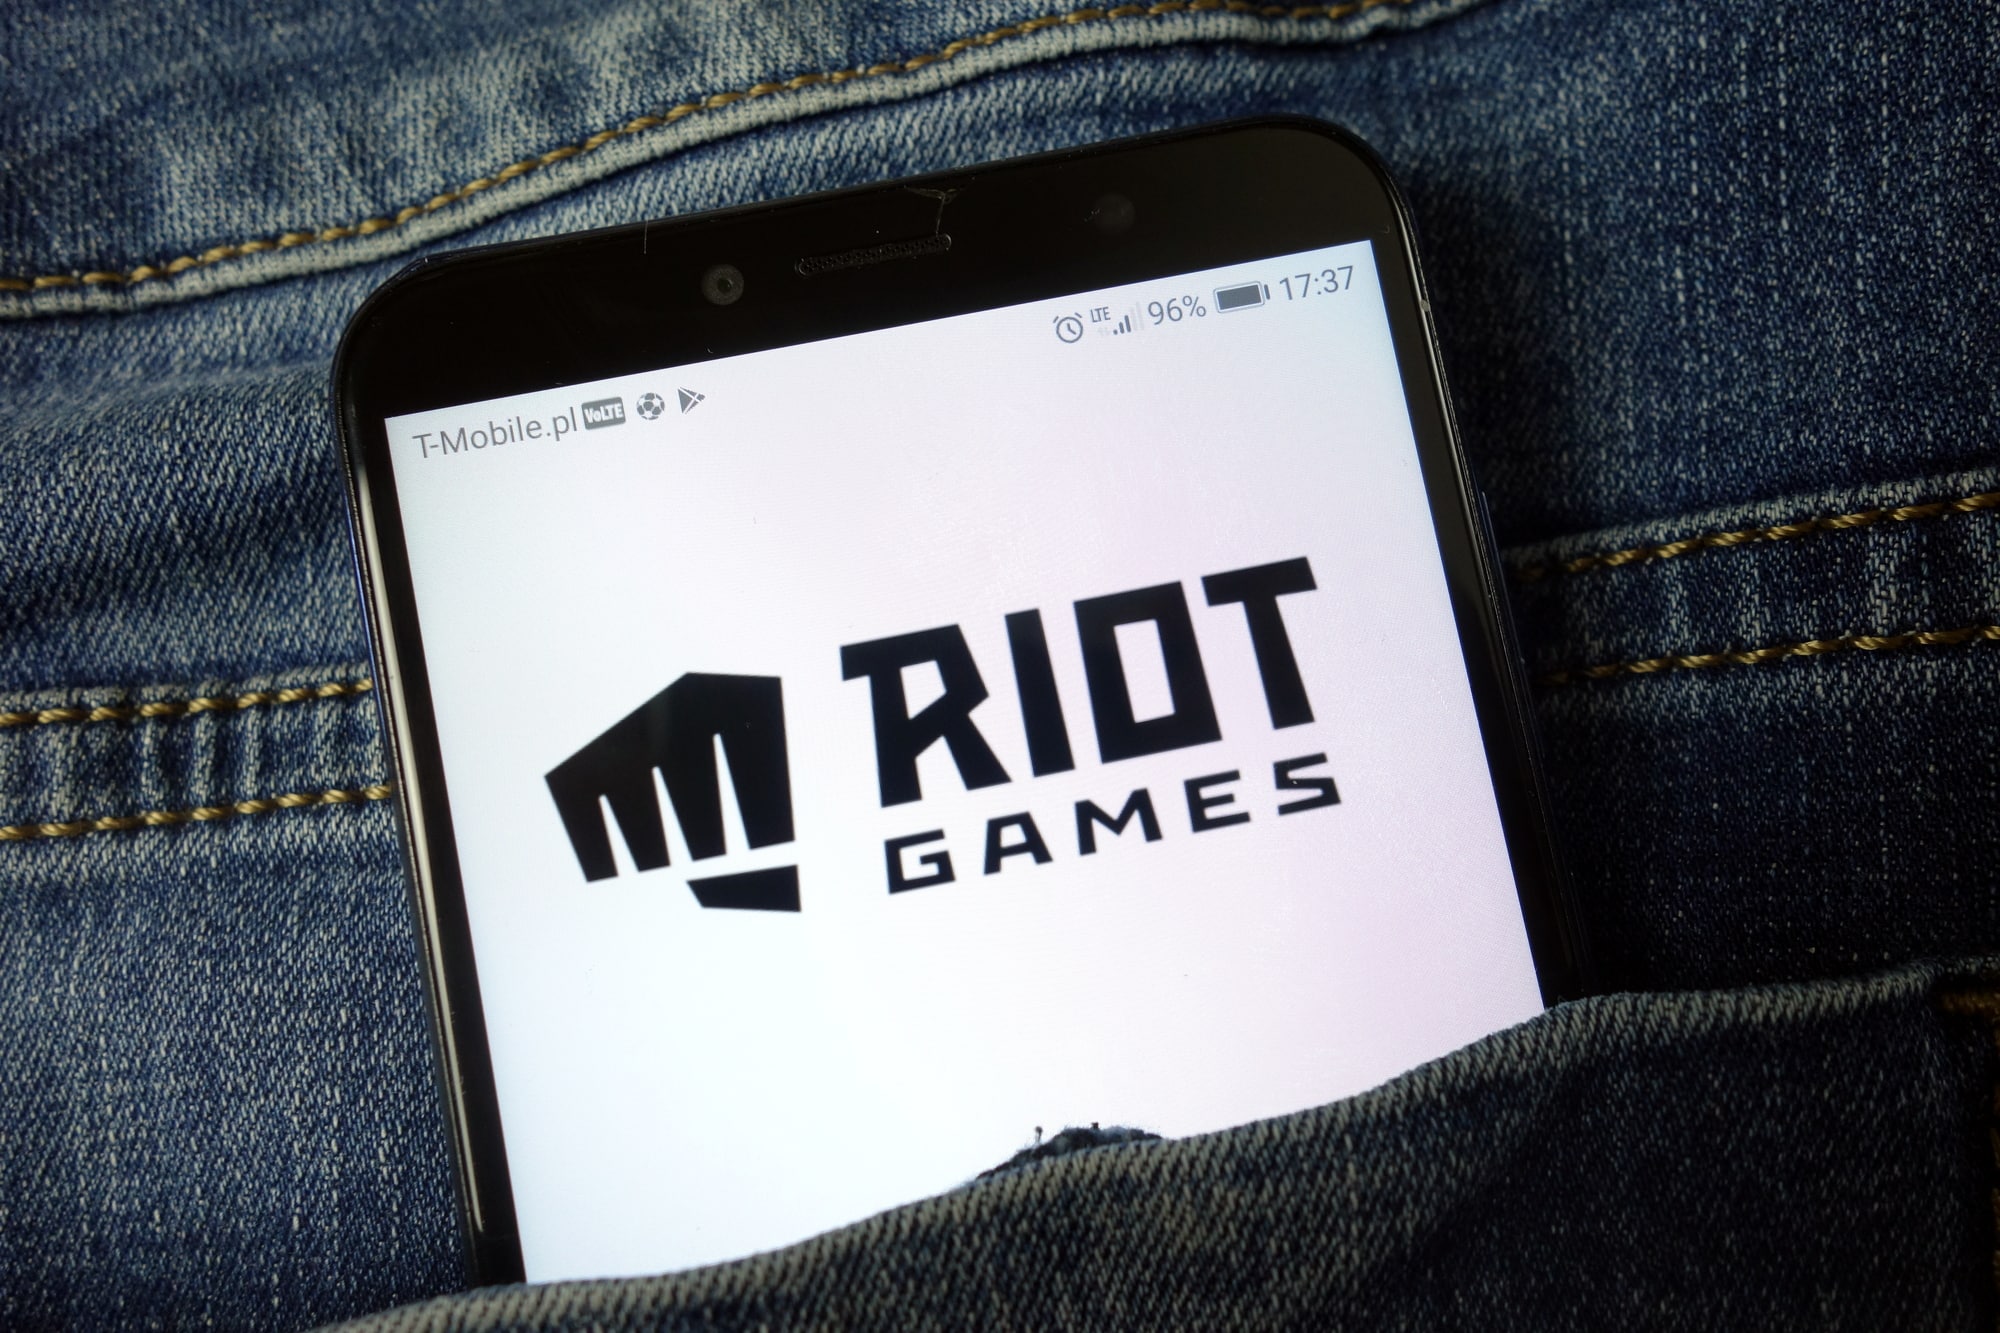 Riot Games hacked, League of Legends, VALORANT among games affected